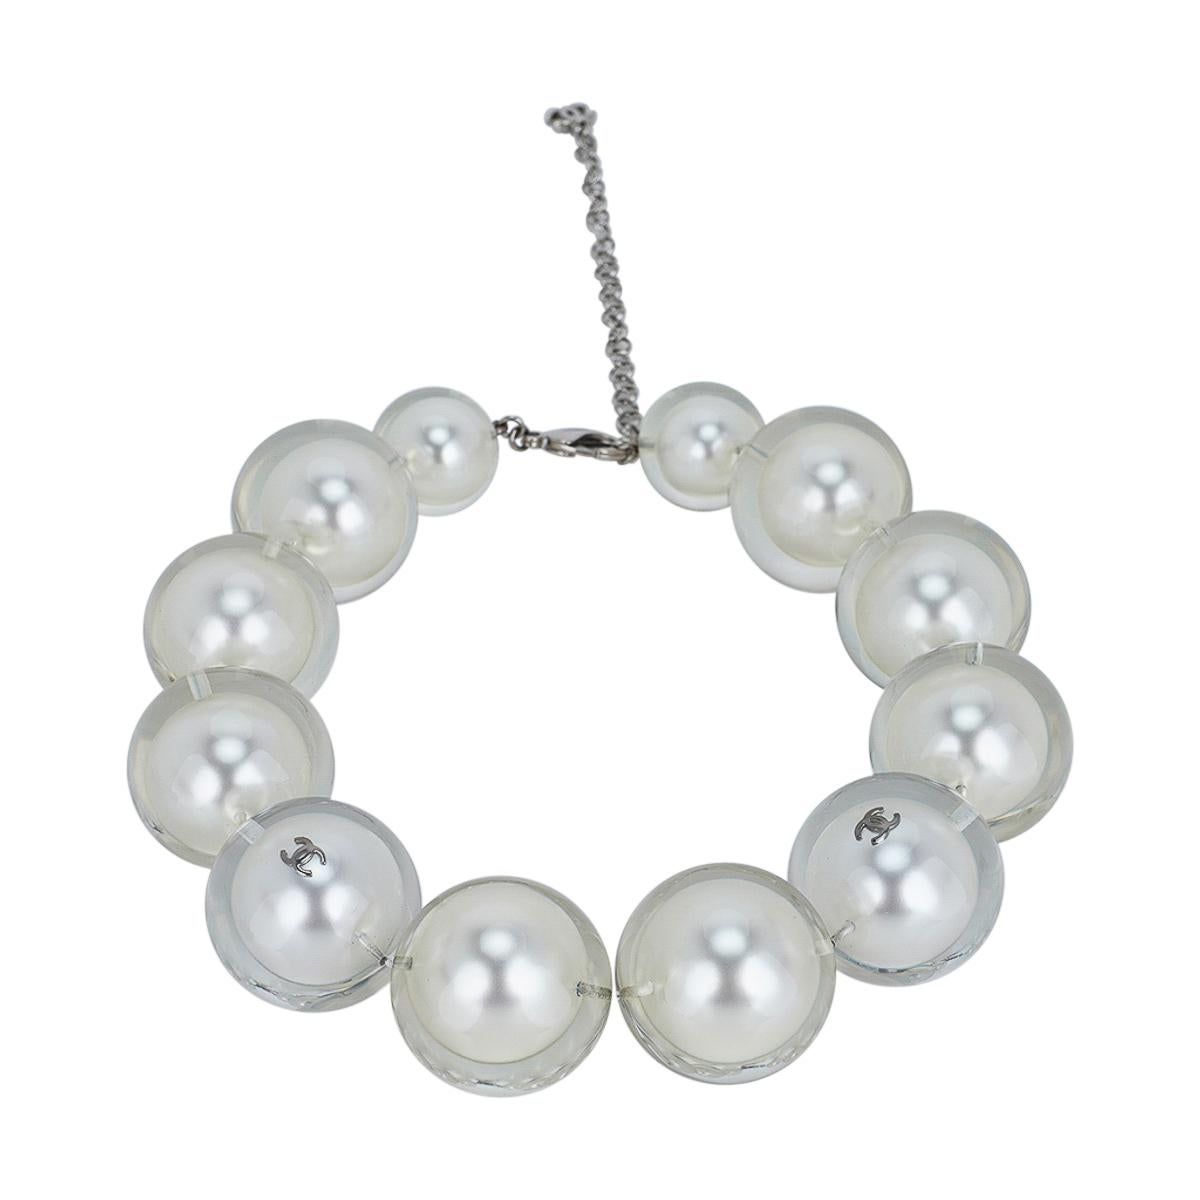 Chanel Limited Edition Karl Lagerfeld Pearl Choker Resin Coated 2017 In Good Condition For Sale In Miami, FL